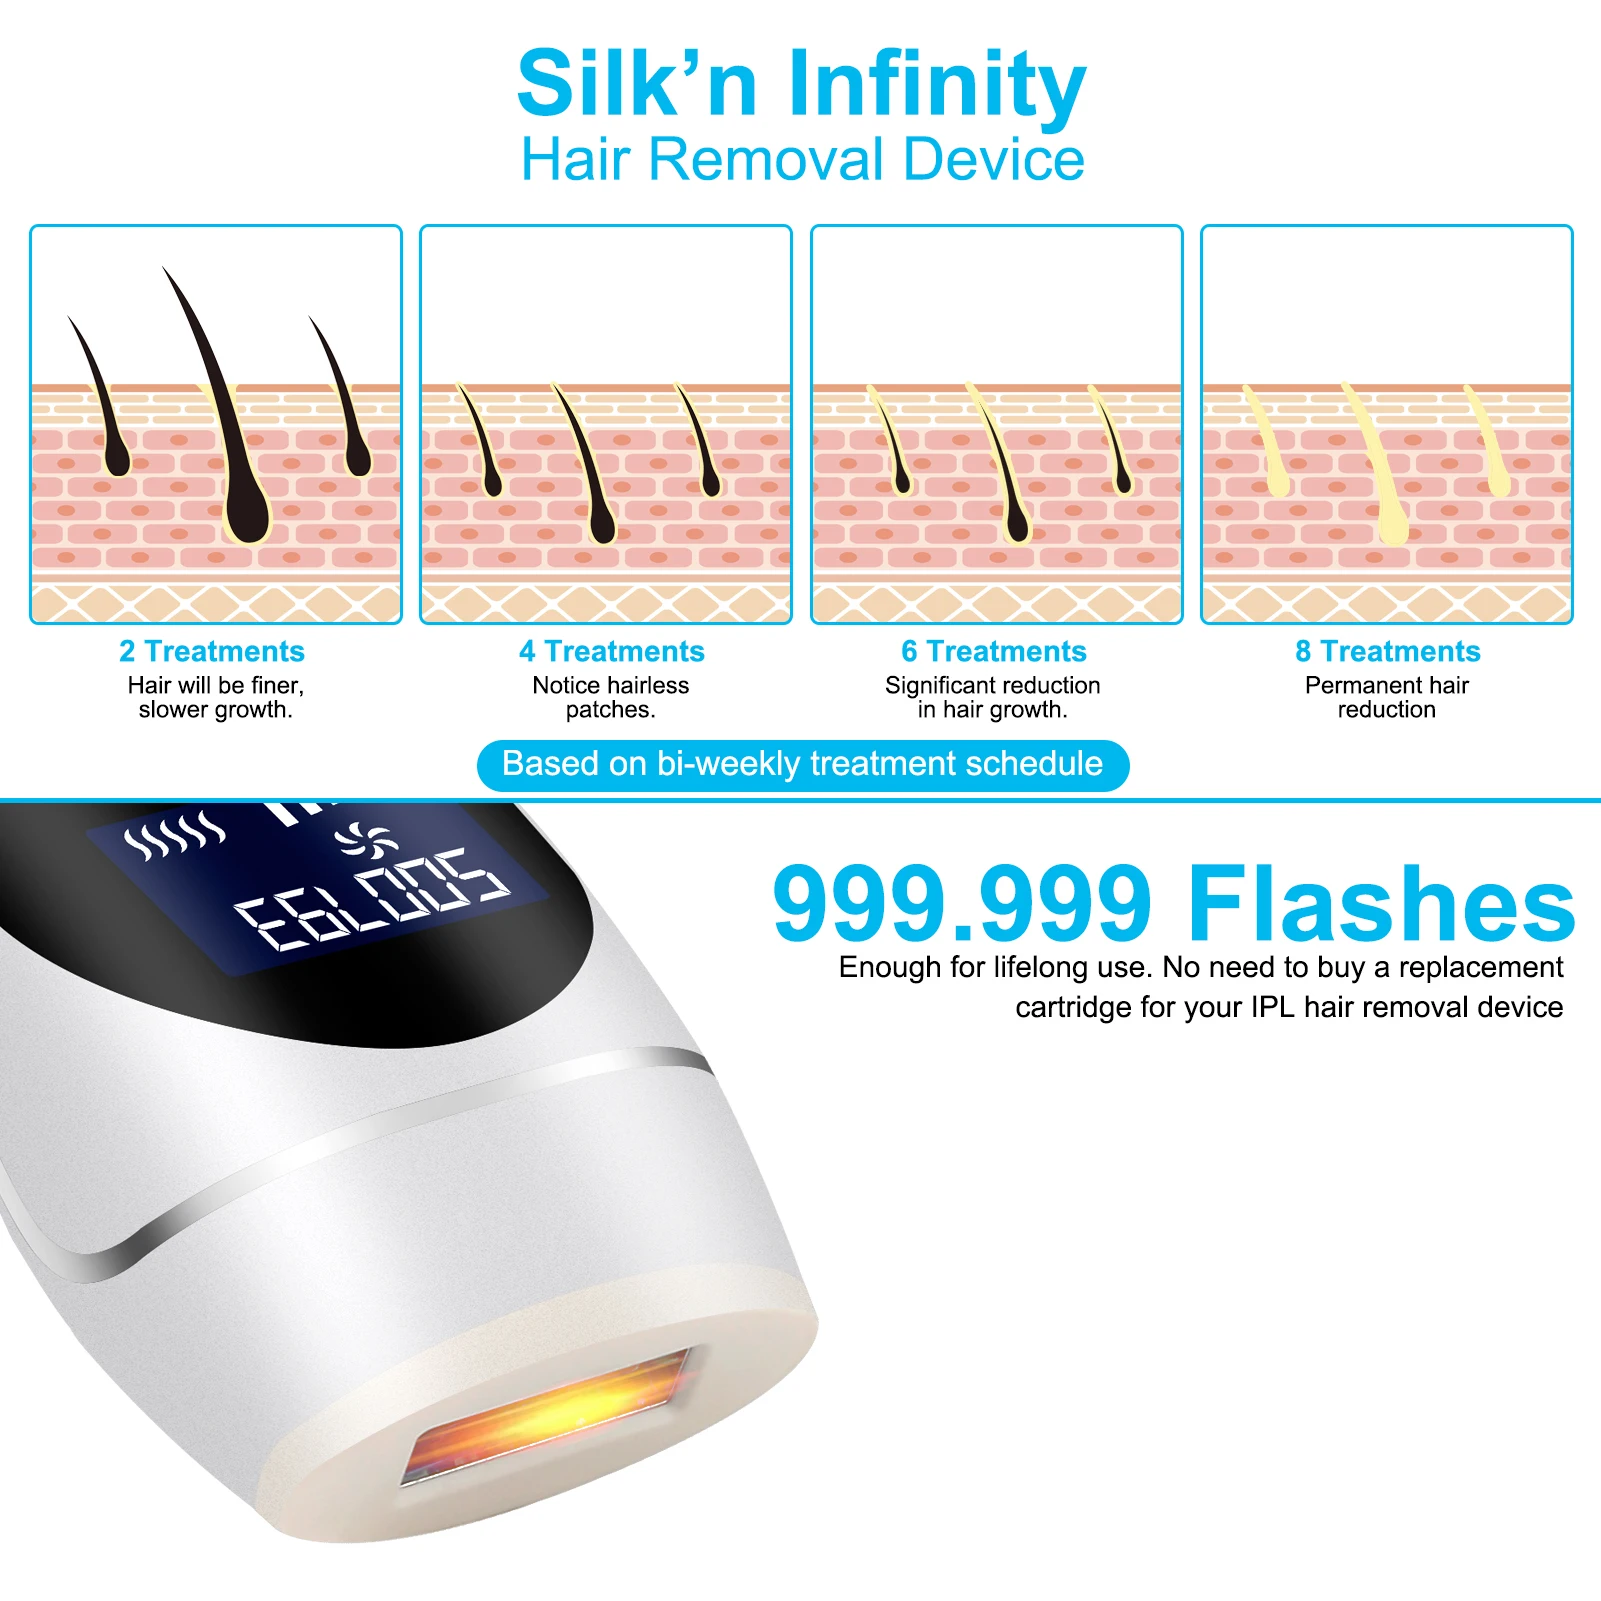 Laser Hair Removal Device IPL Whole Body Permanent Electric Depilador For Women 900000 Flash Electric Pulsed Light Epilator enlarge